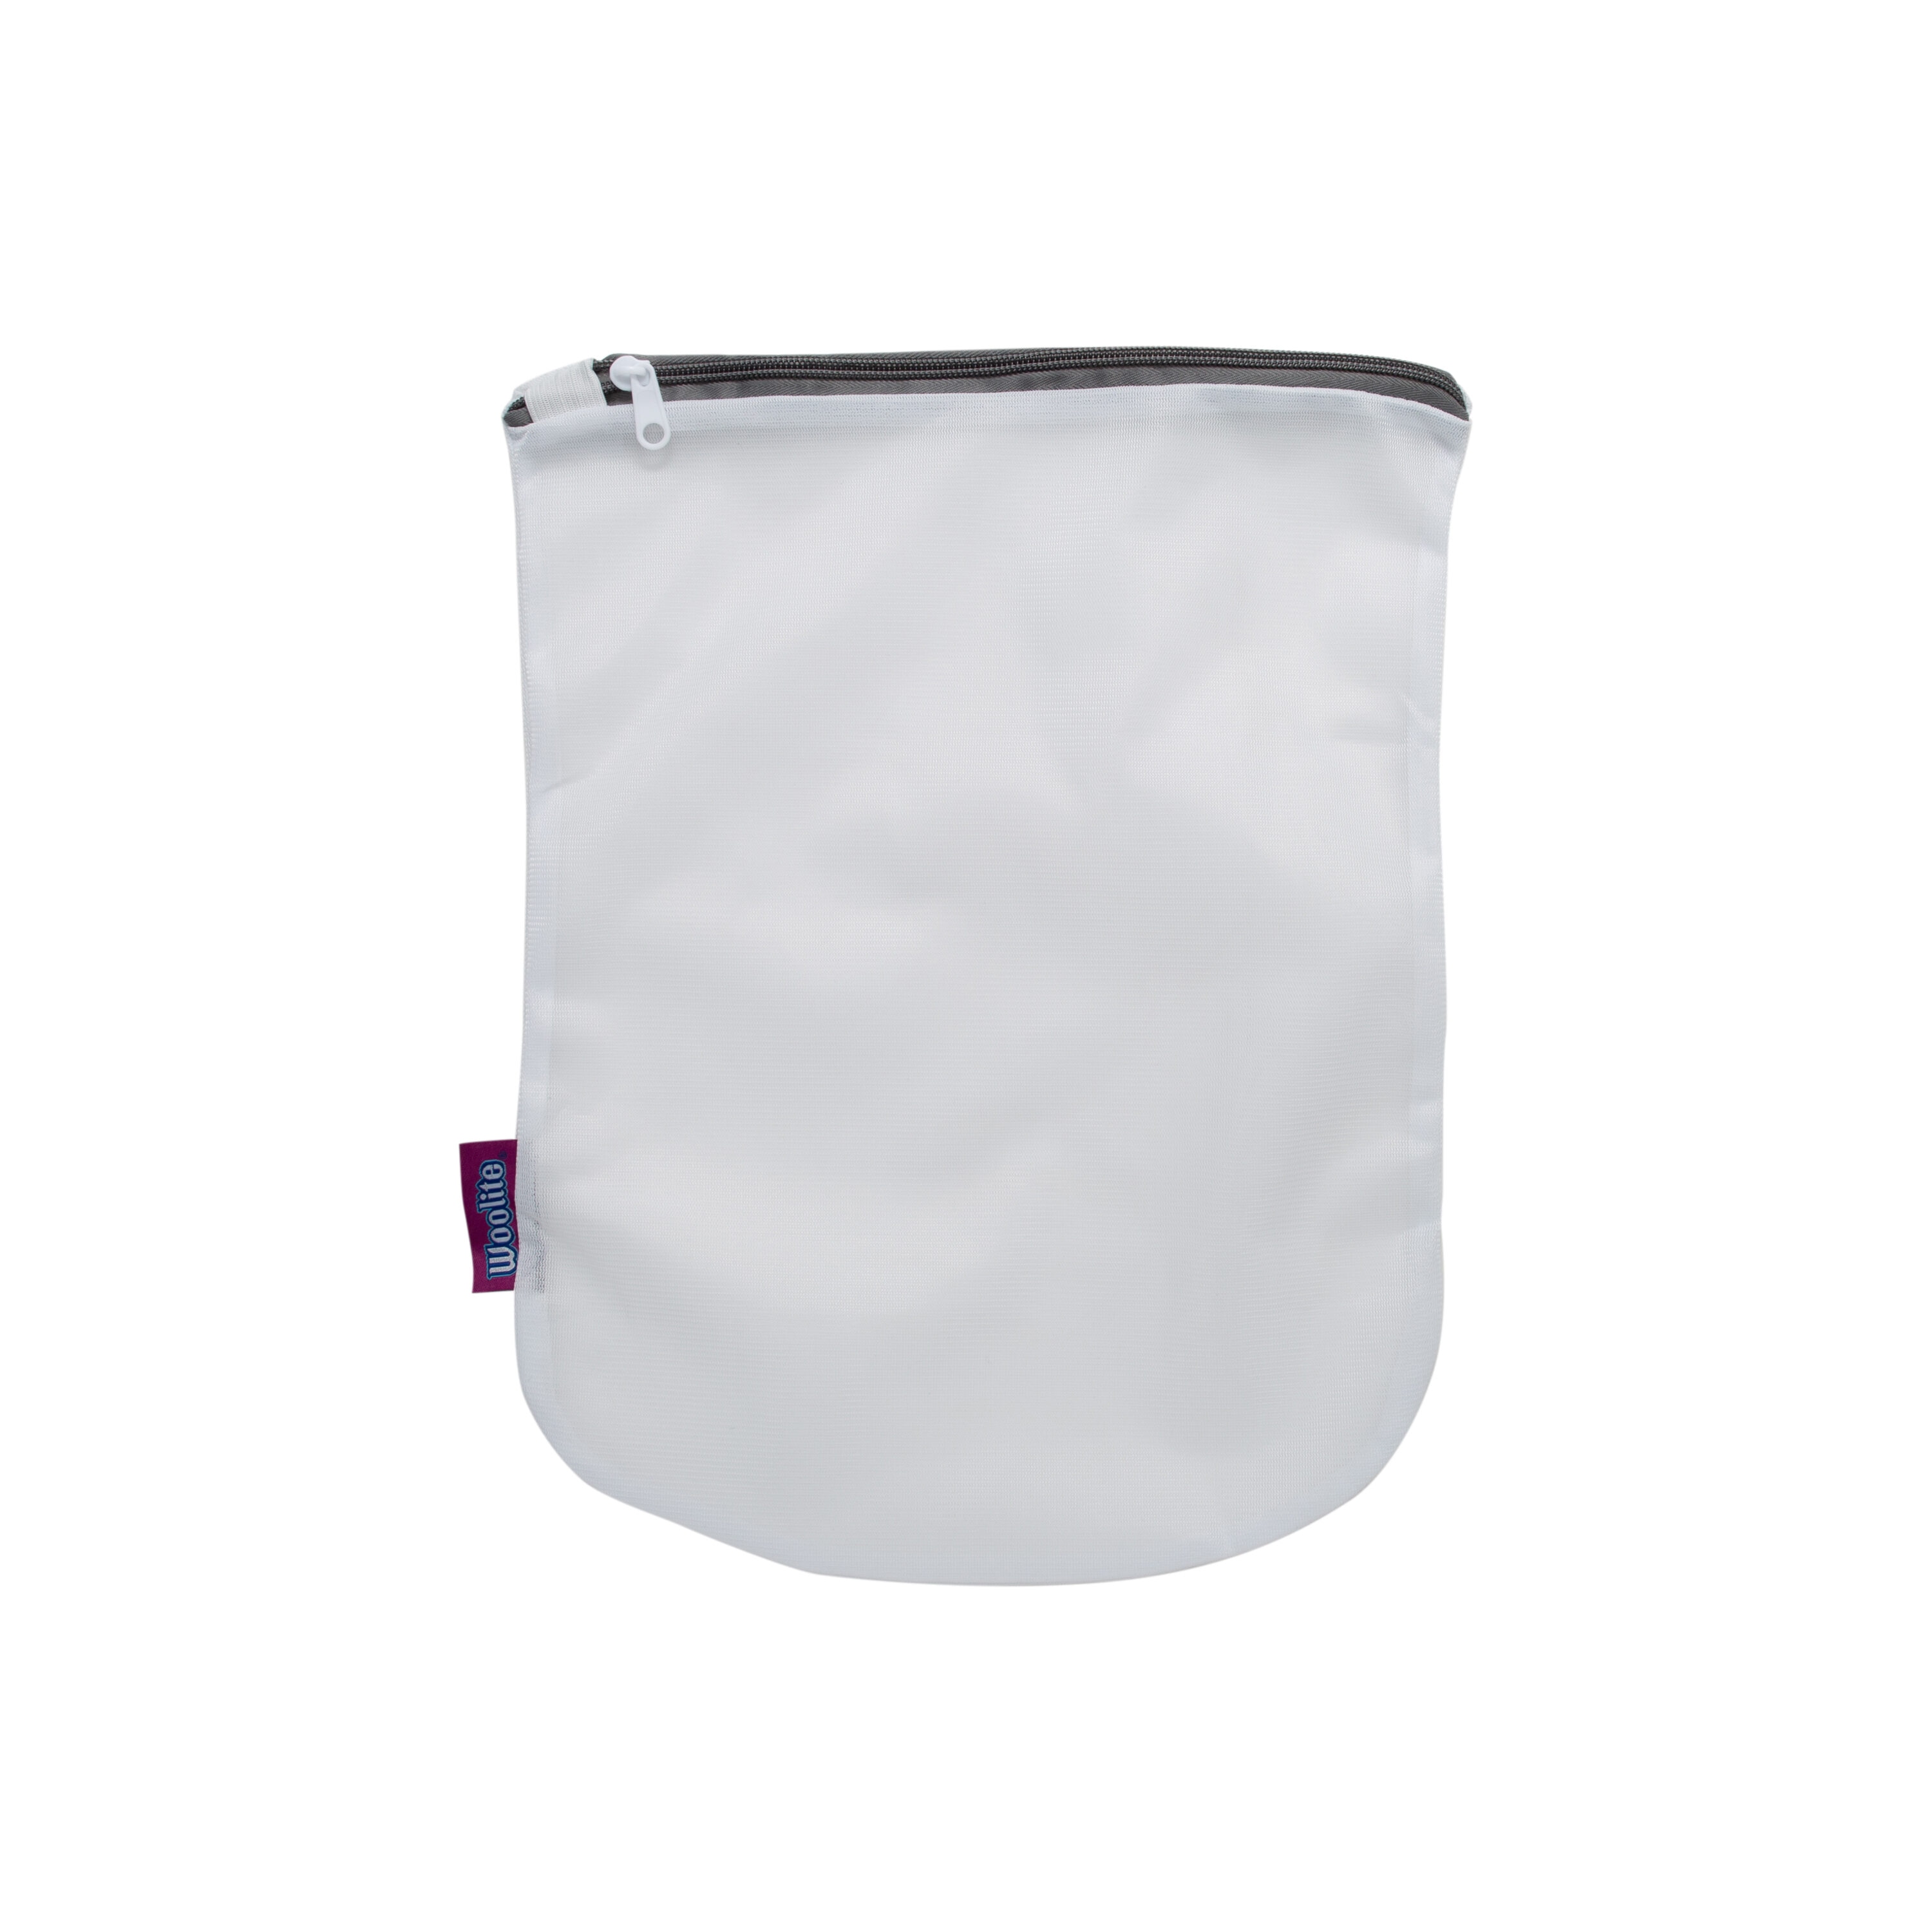 Woolite Mind Reader Laundry Bag Set, 2 Pack Wash Bag, White, Collapsible,  Polyester, Sanitize Treated, Large 23-inx20-in and Medium 12-inx16.5-in  Bags in the Laundry Hampers & Baskets department at